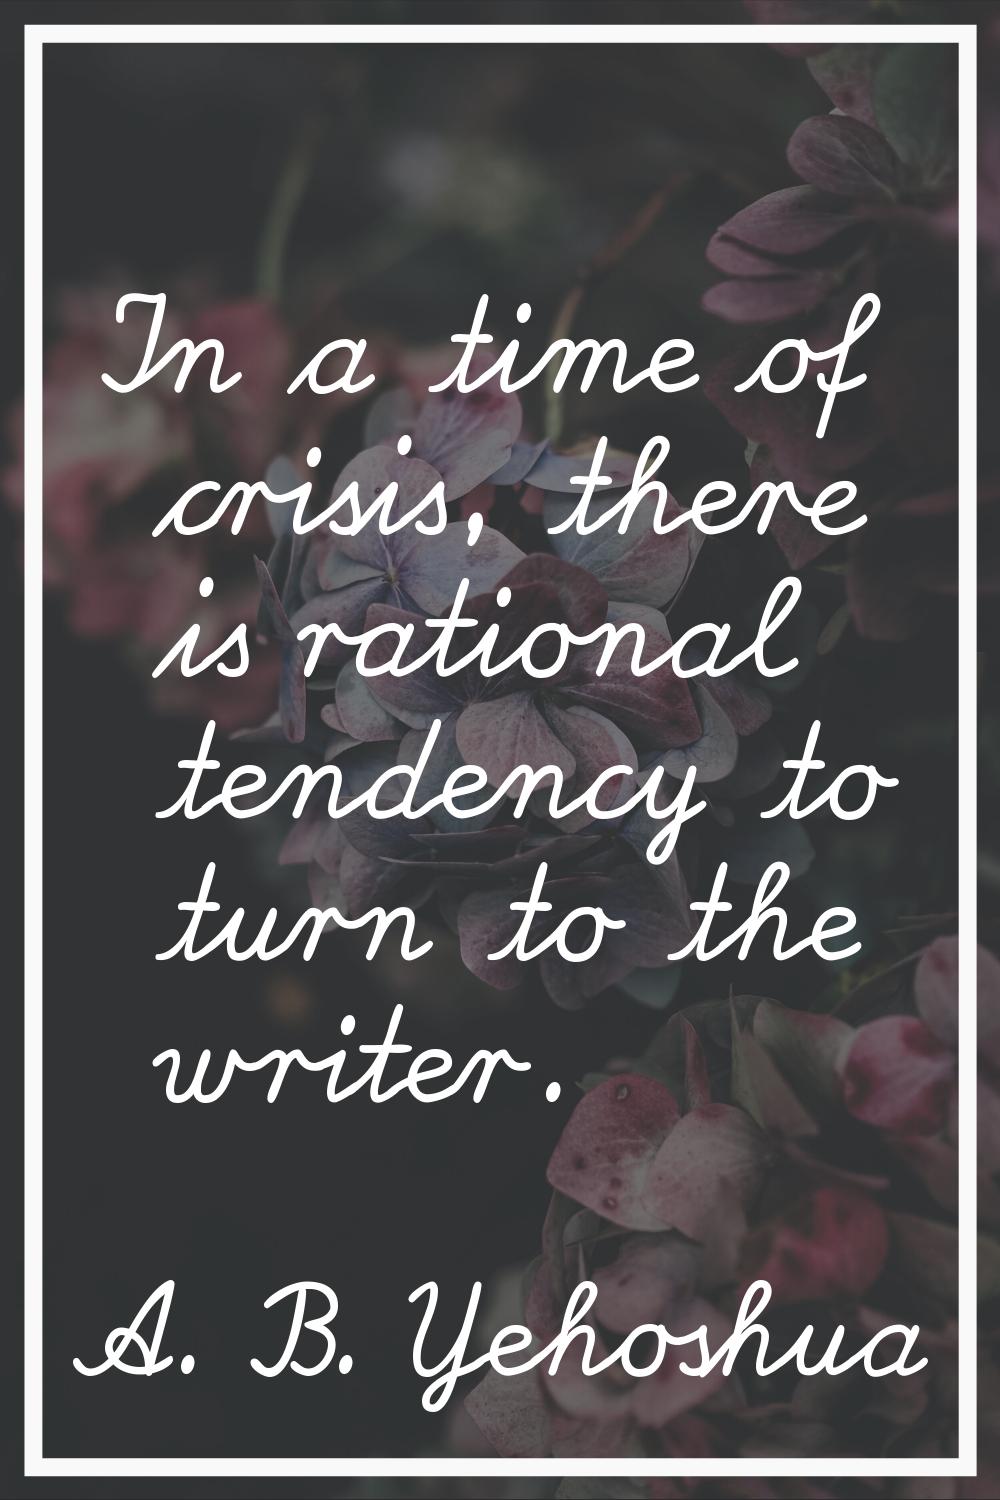 In a time of crisis, there is rational tendency to turn to the writer.